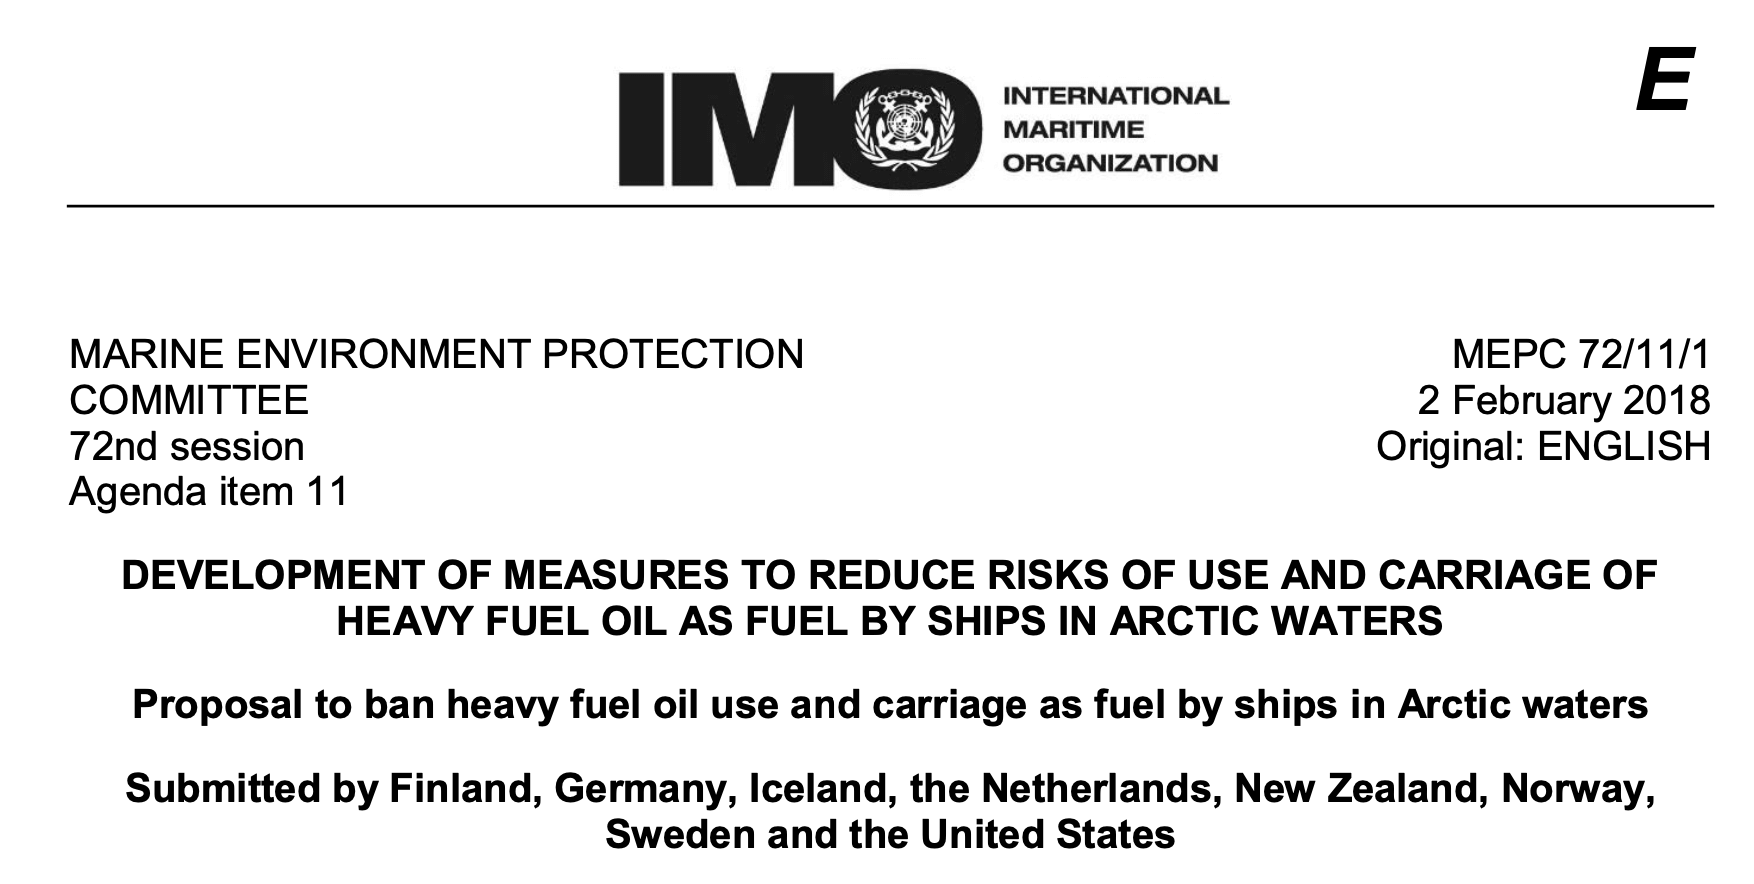 MEPC72/11/1: Proposal to Ban Heavy Fuel Oil Use and Carriage as Fuel by Ships in Arctic Waters